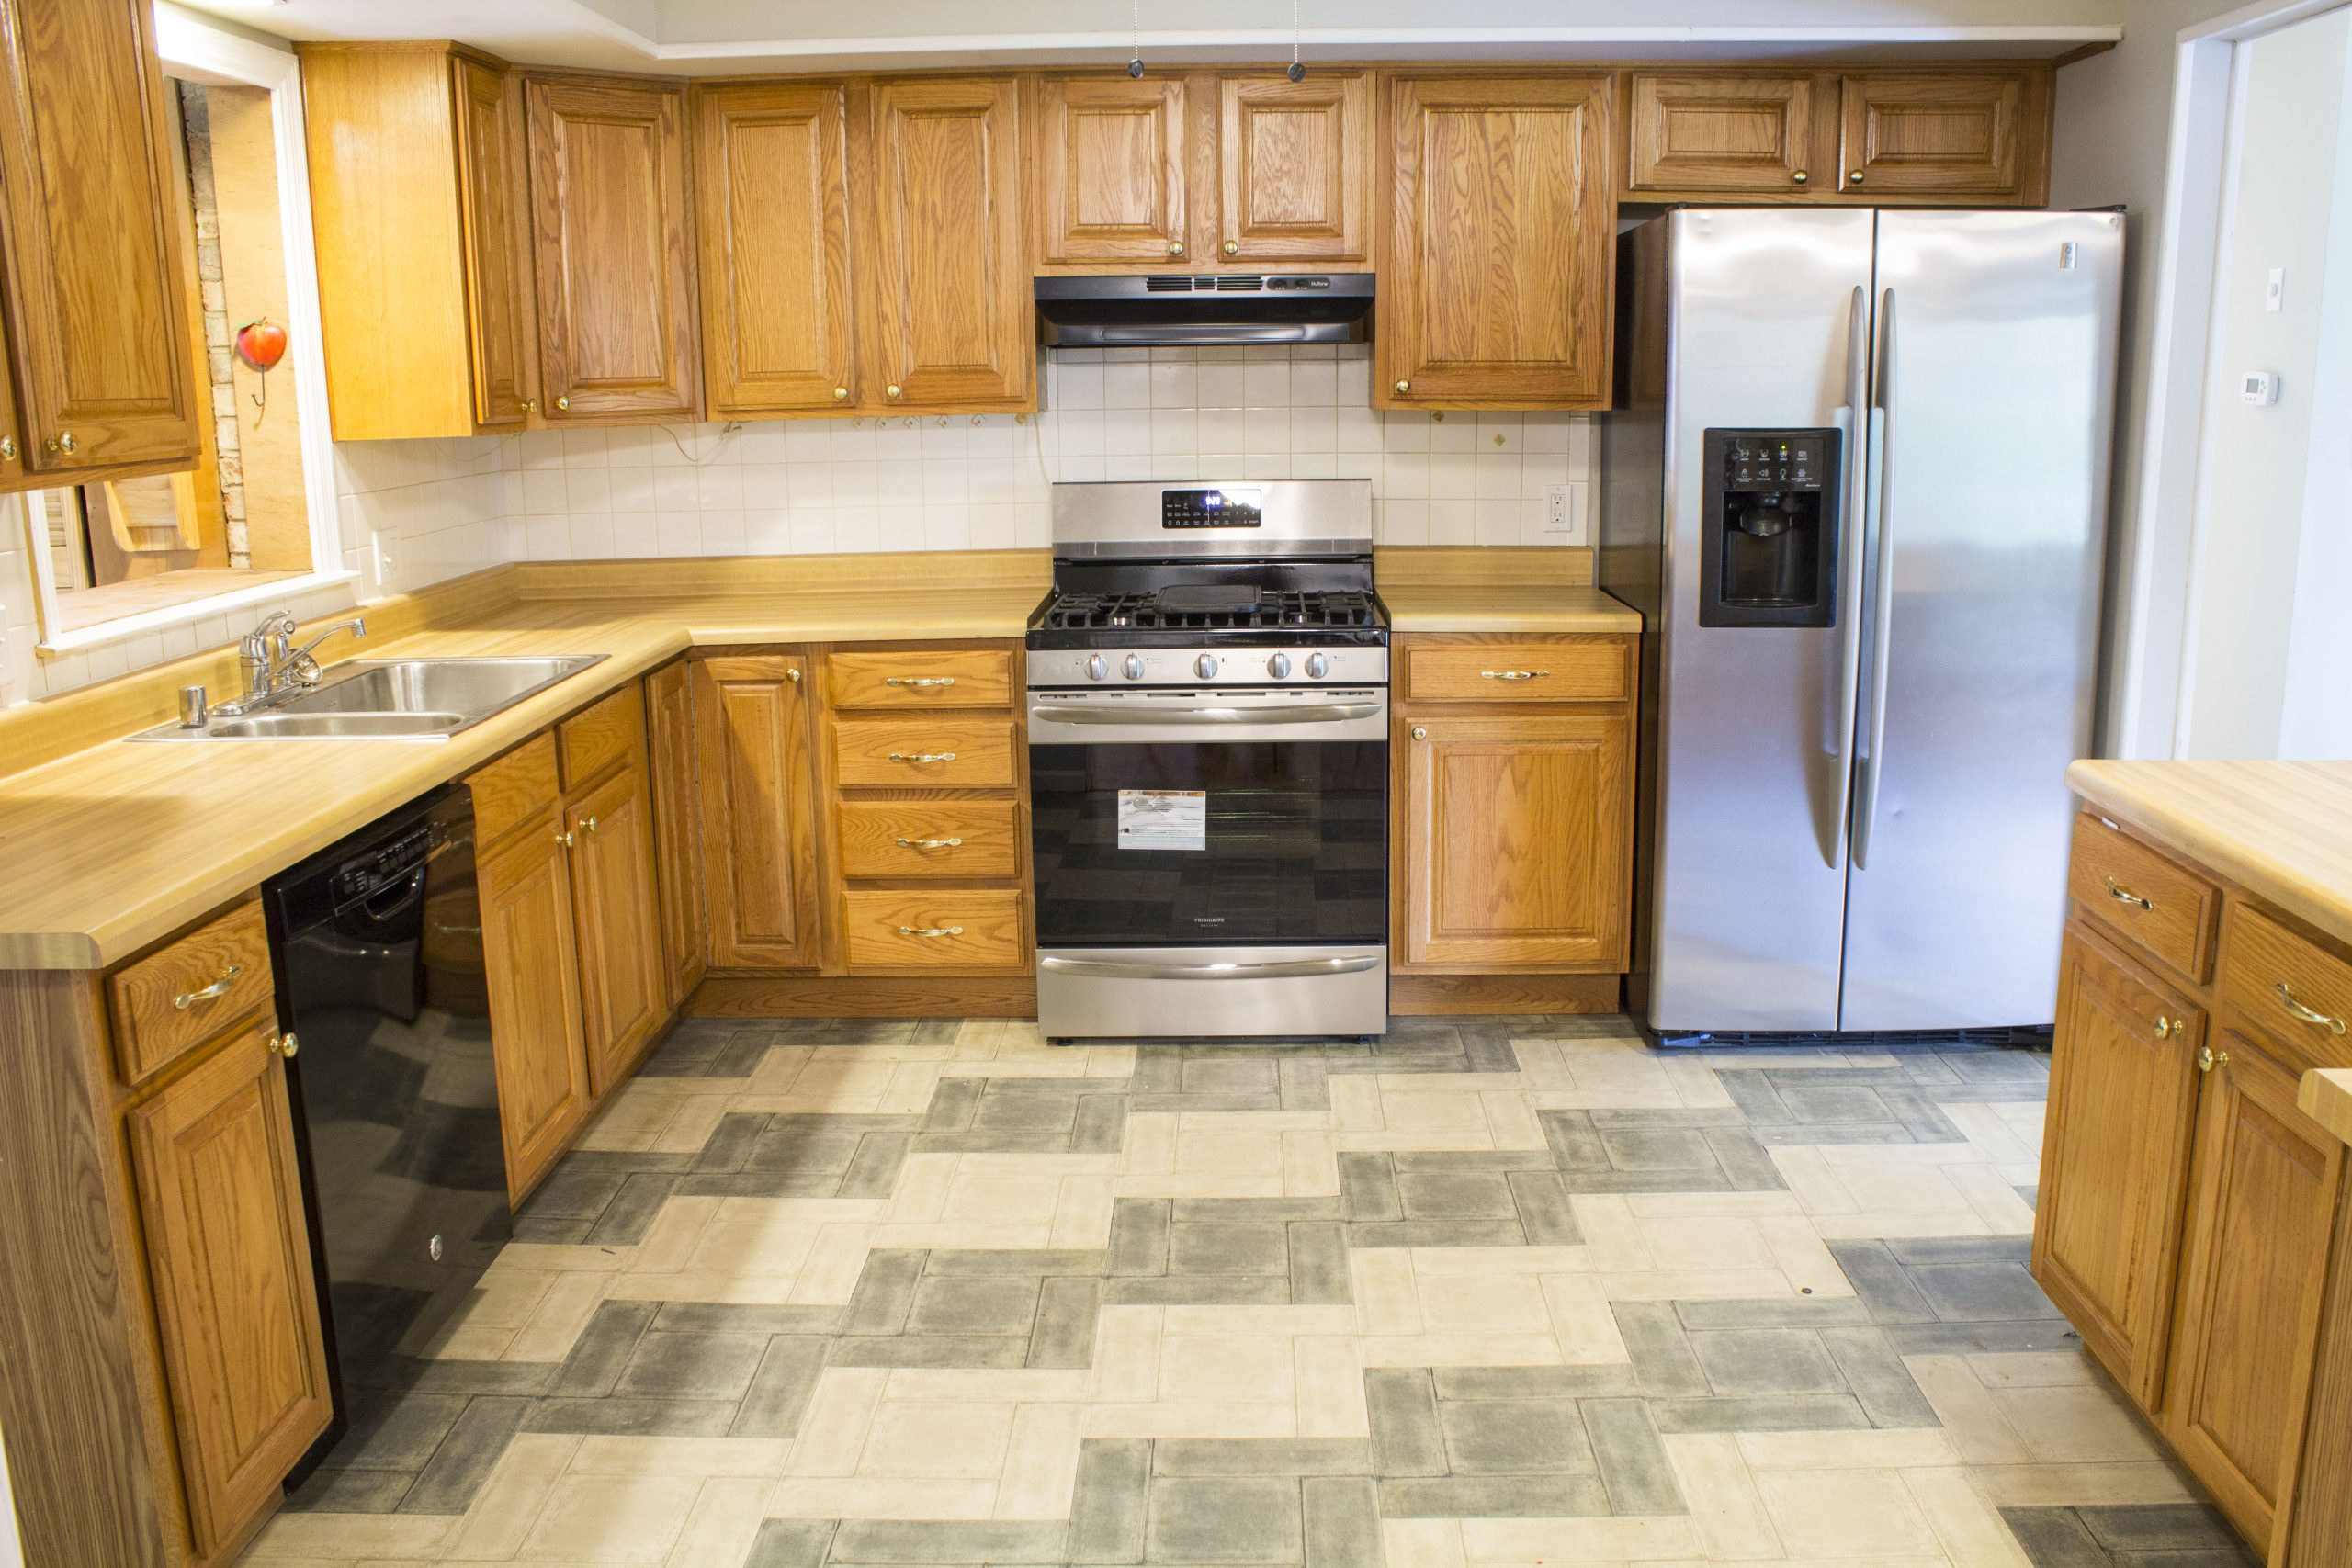 Photo of a kitchen for residential real estate photos